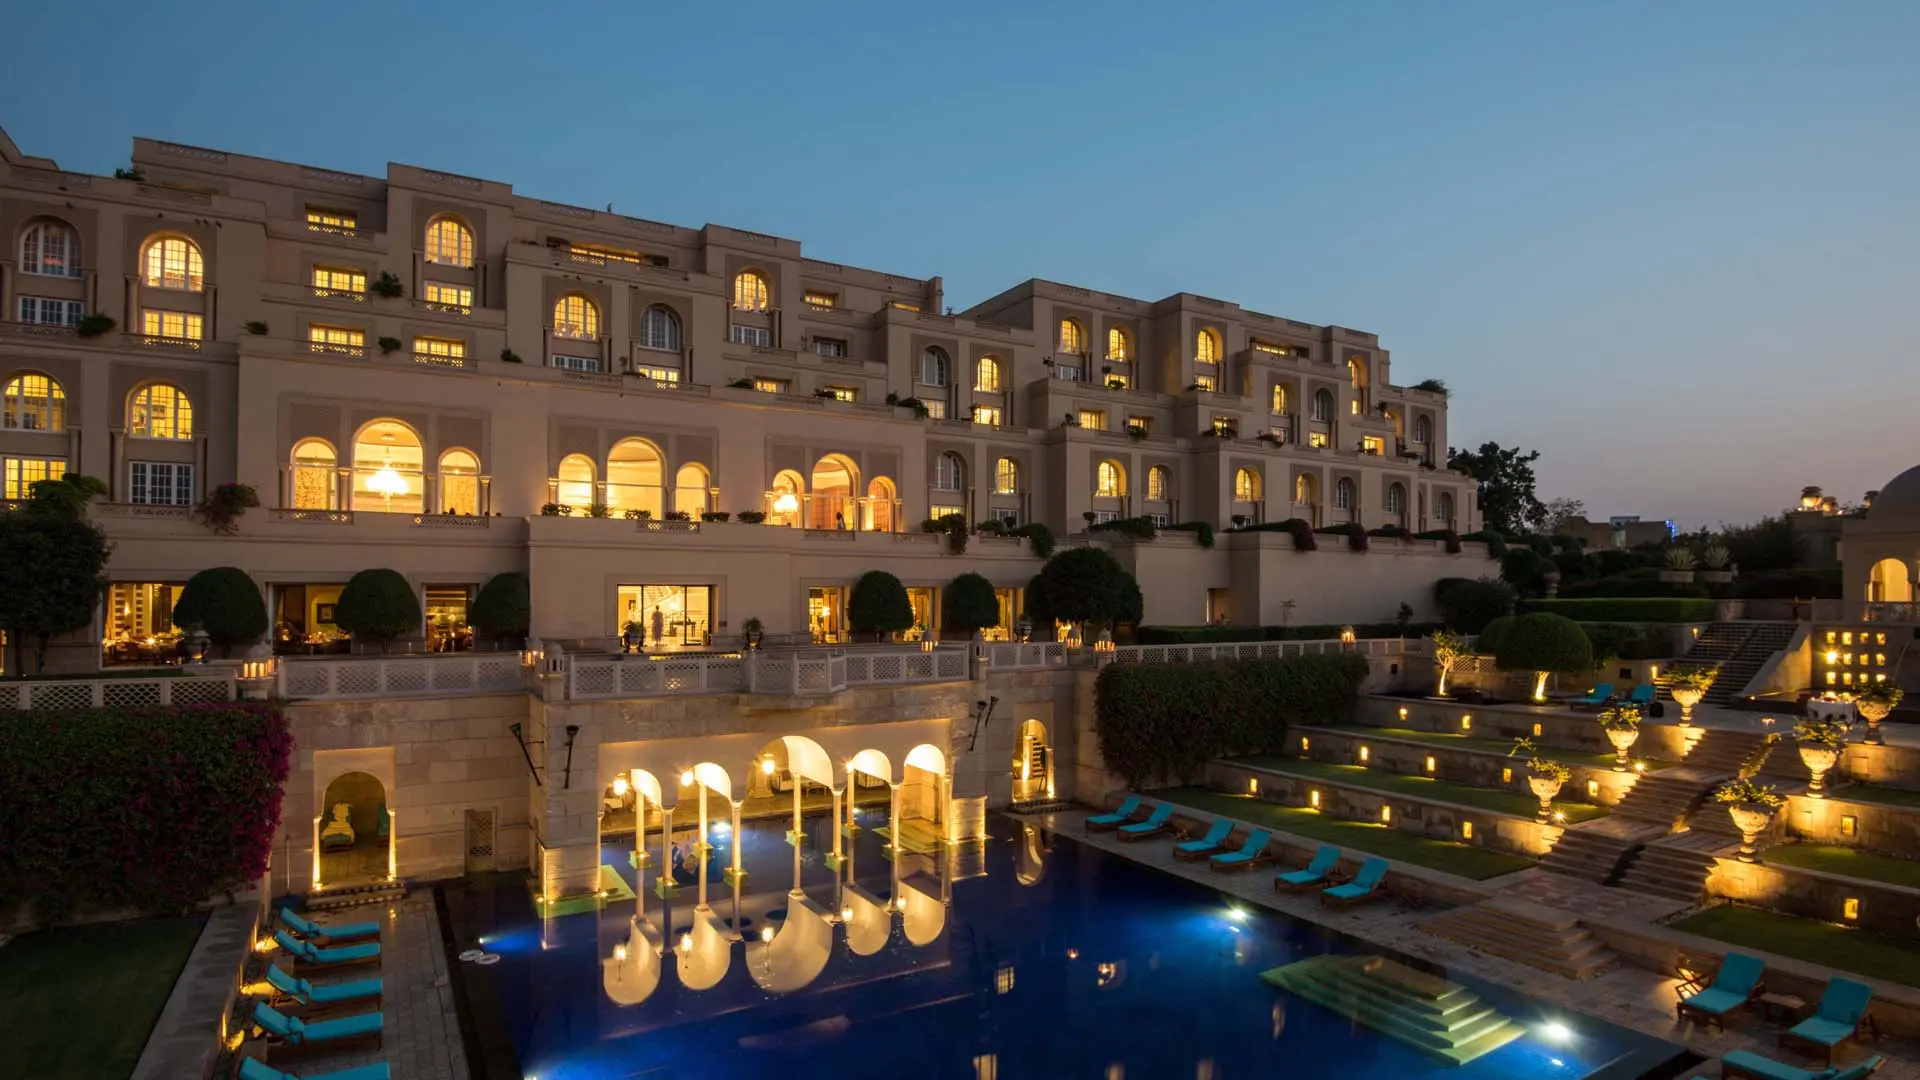 Hotel review Service & Facilities' - The Oberoi Amarvilas Agra - 0